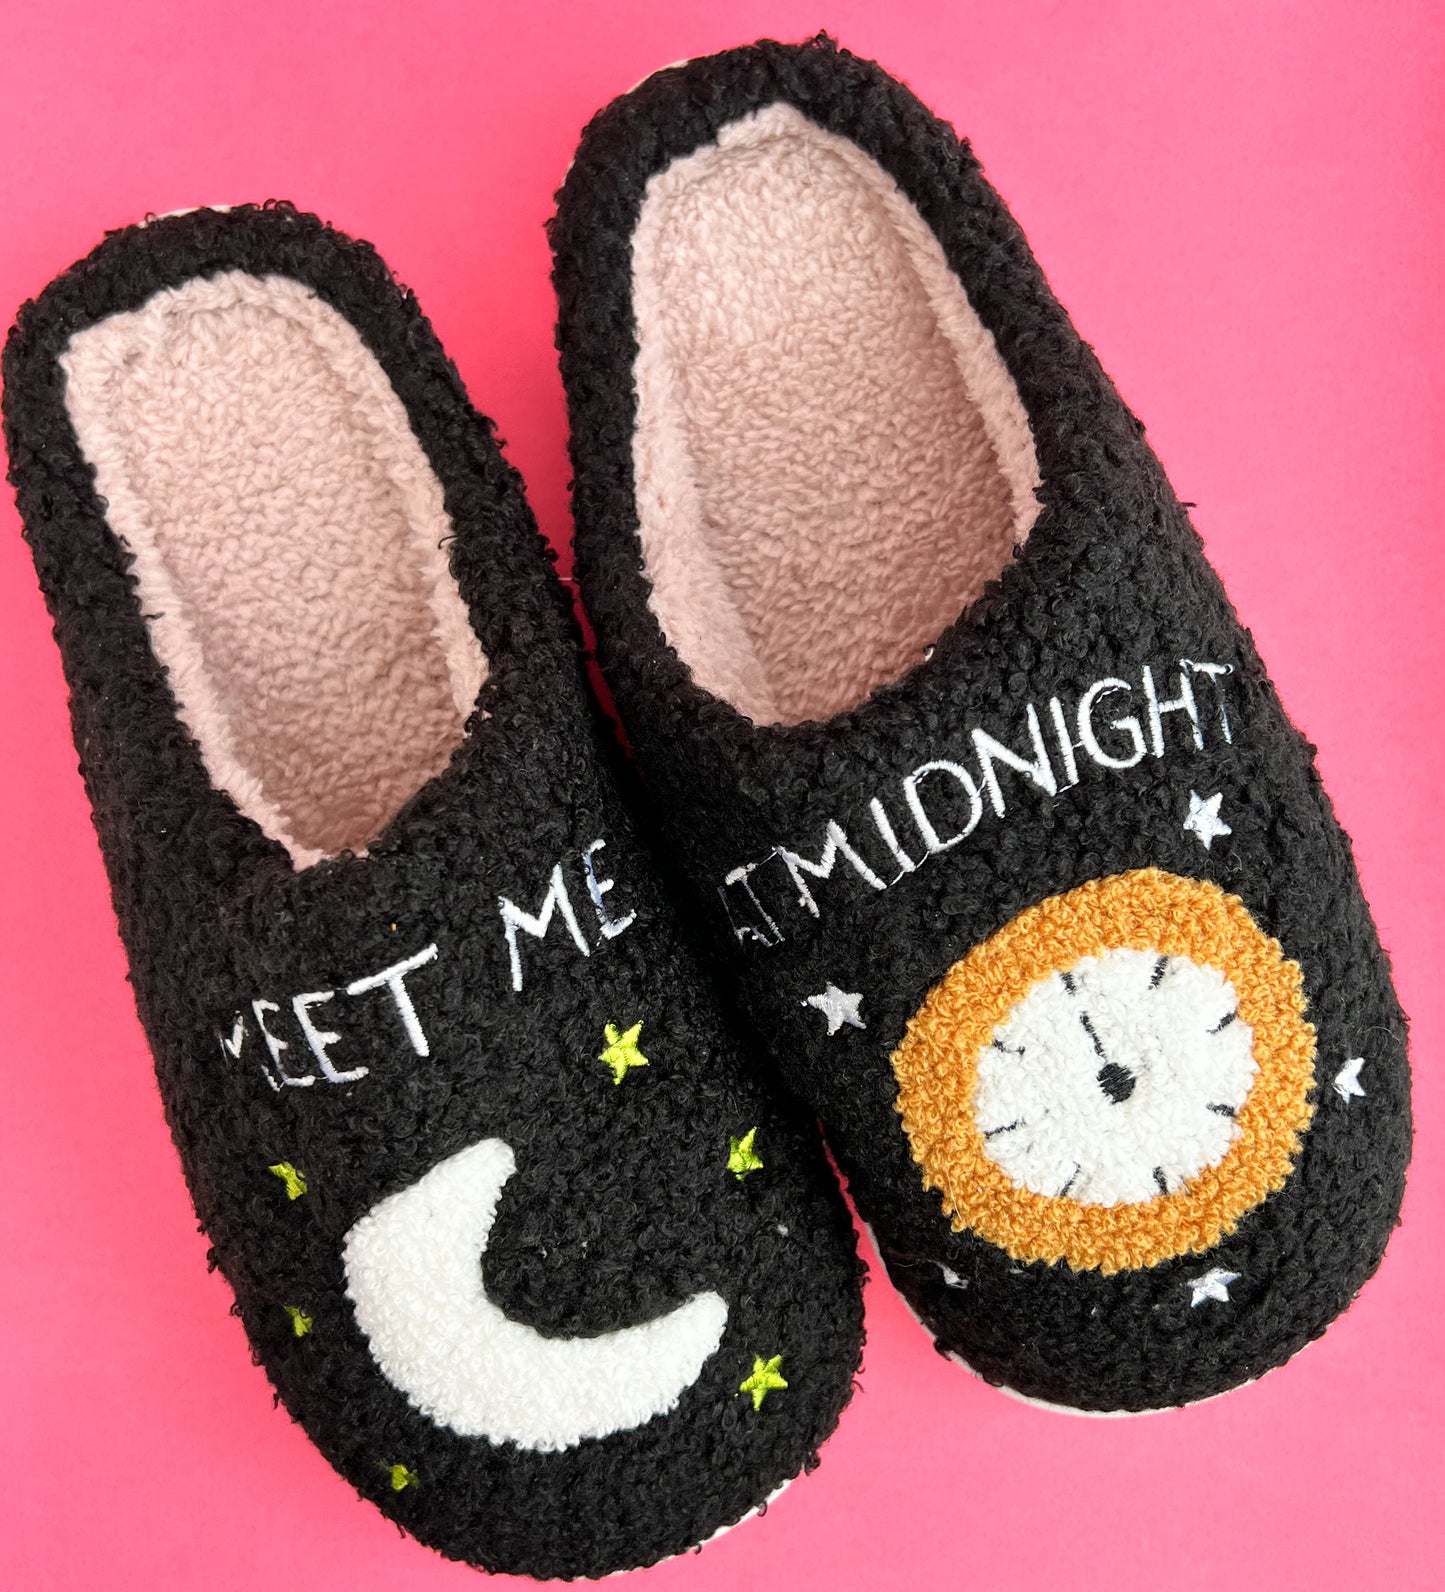 Meet Me At Midnight Slippers